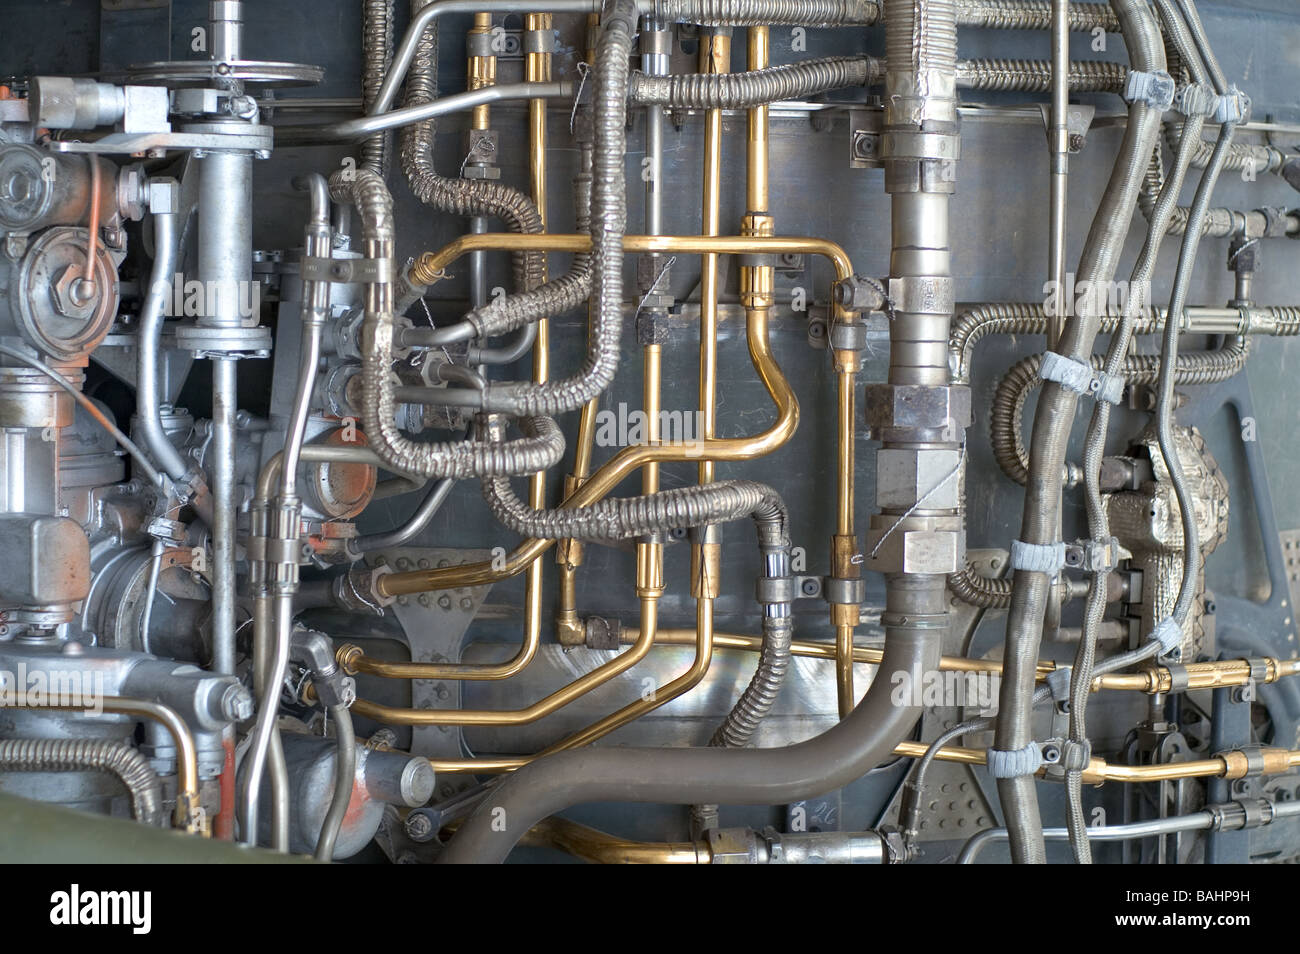 Fuel Lines and Hydraulics on the side of a turbine jet engine Stock Photo